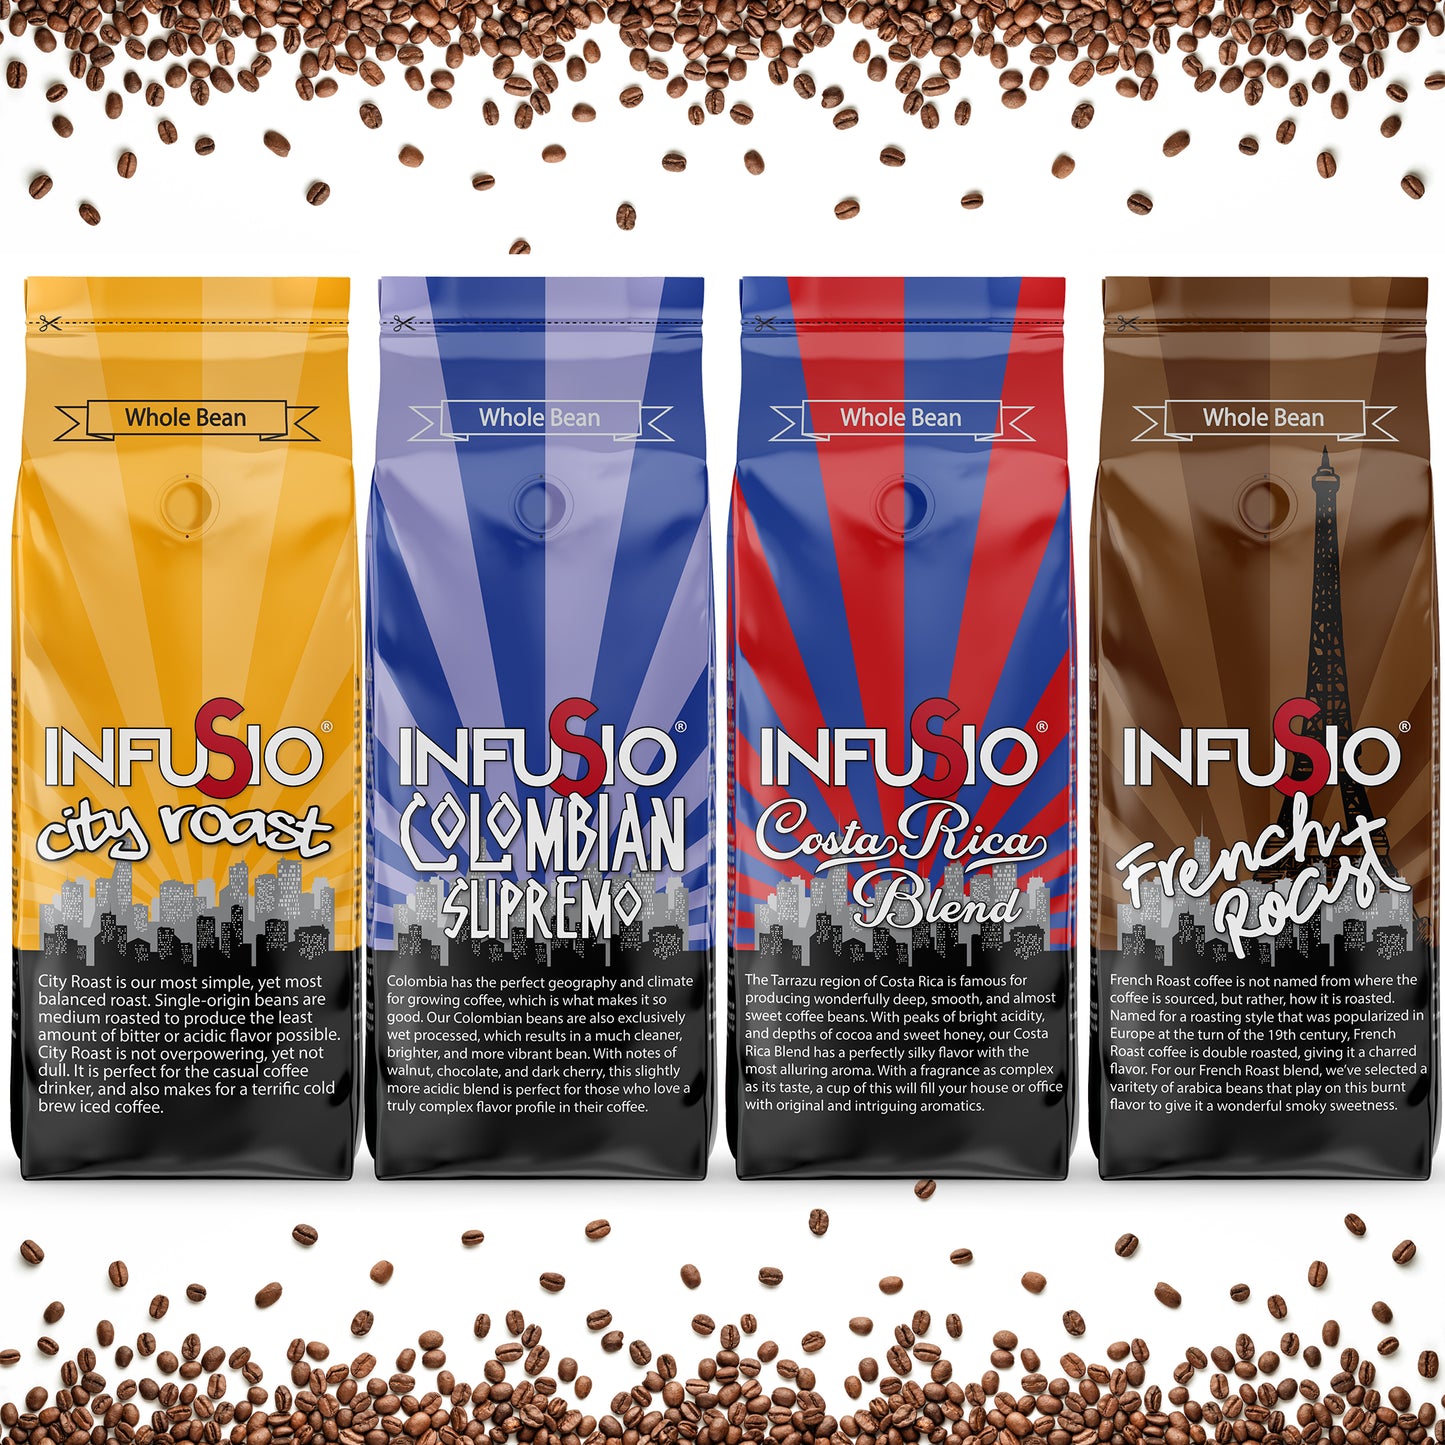 InfuSio Gourmet Whole Bean Coffee, (64oz) Variety Pack, Eight 8oz Bags (Pack of 8) - 4lbs Total - With Flavored Blends - Bagged Coffee